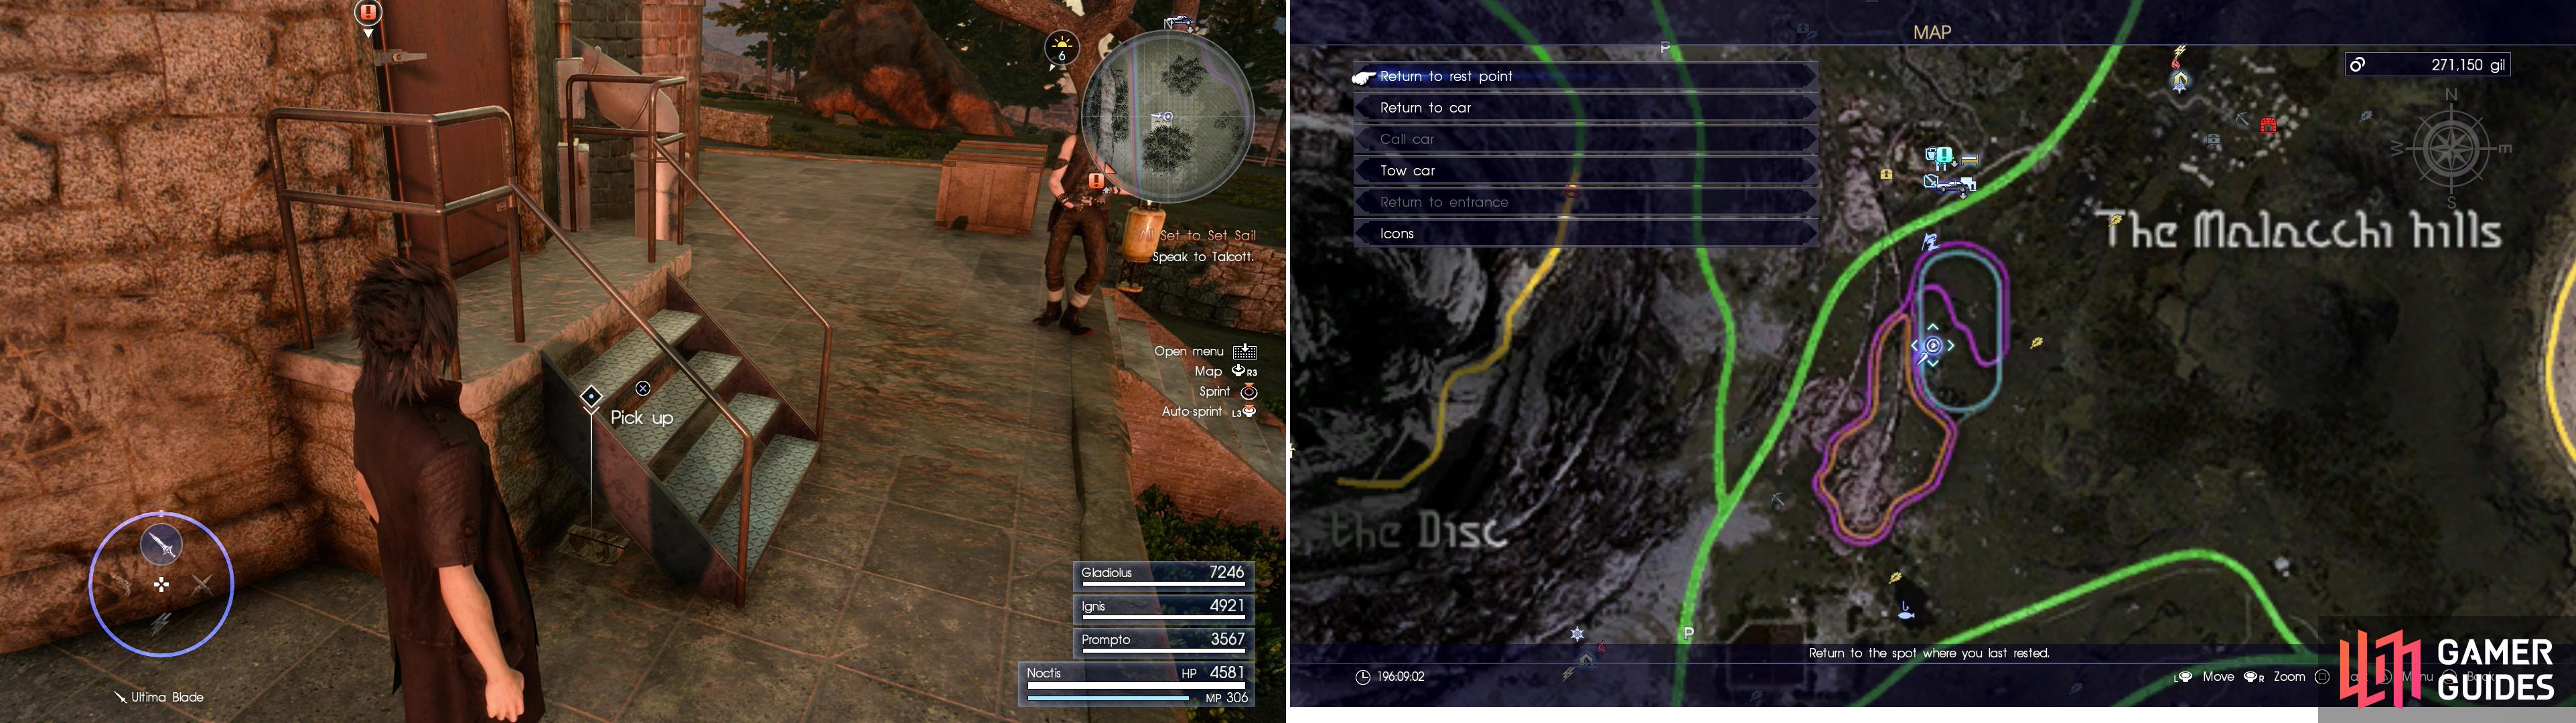 Search near the gold-domed towers amidst the Chocobo race tracks to find Mystery Map VII (left), at the area indicated on the map (right).